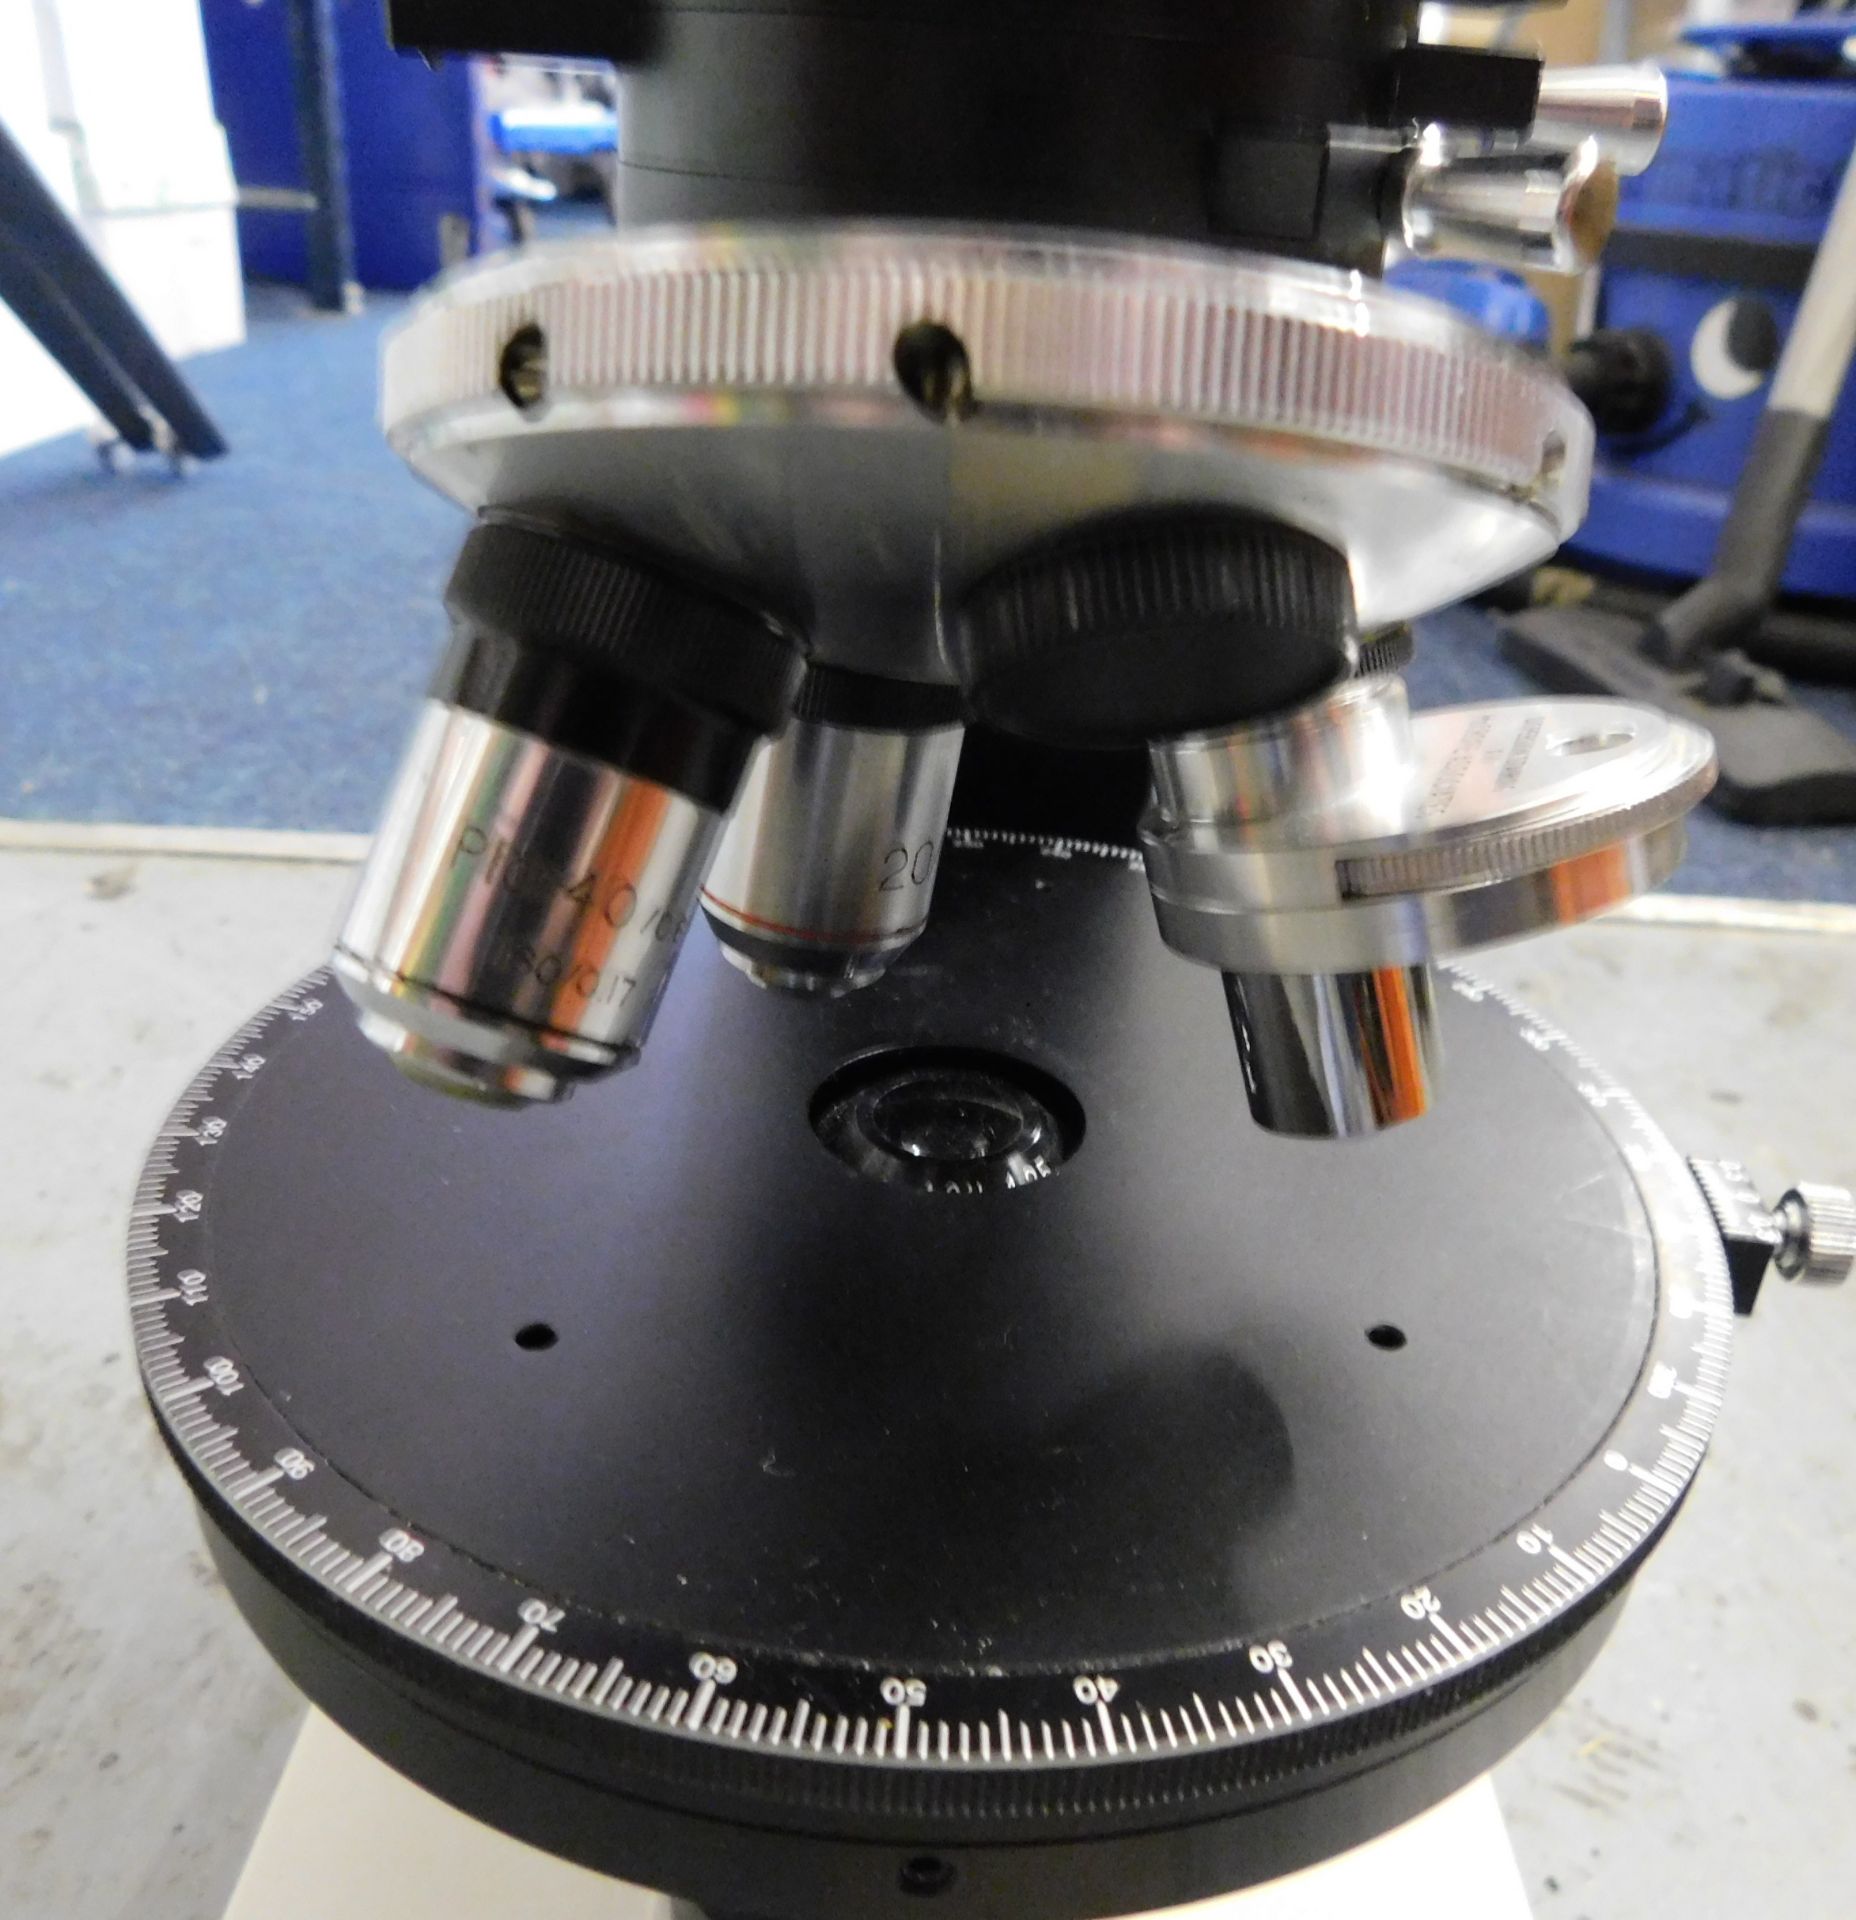 Meiji ML9200 Microscope, Serial Number 903715 (Location: Stockport. Please Refer to General Notes) - Image 4 of 6